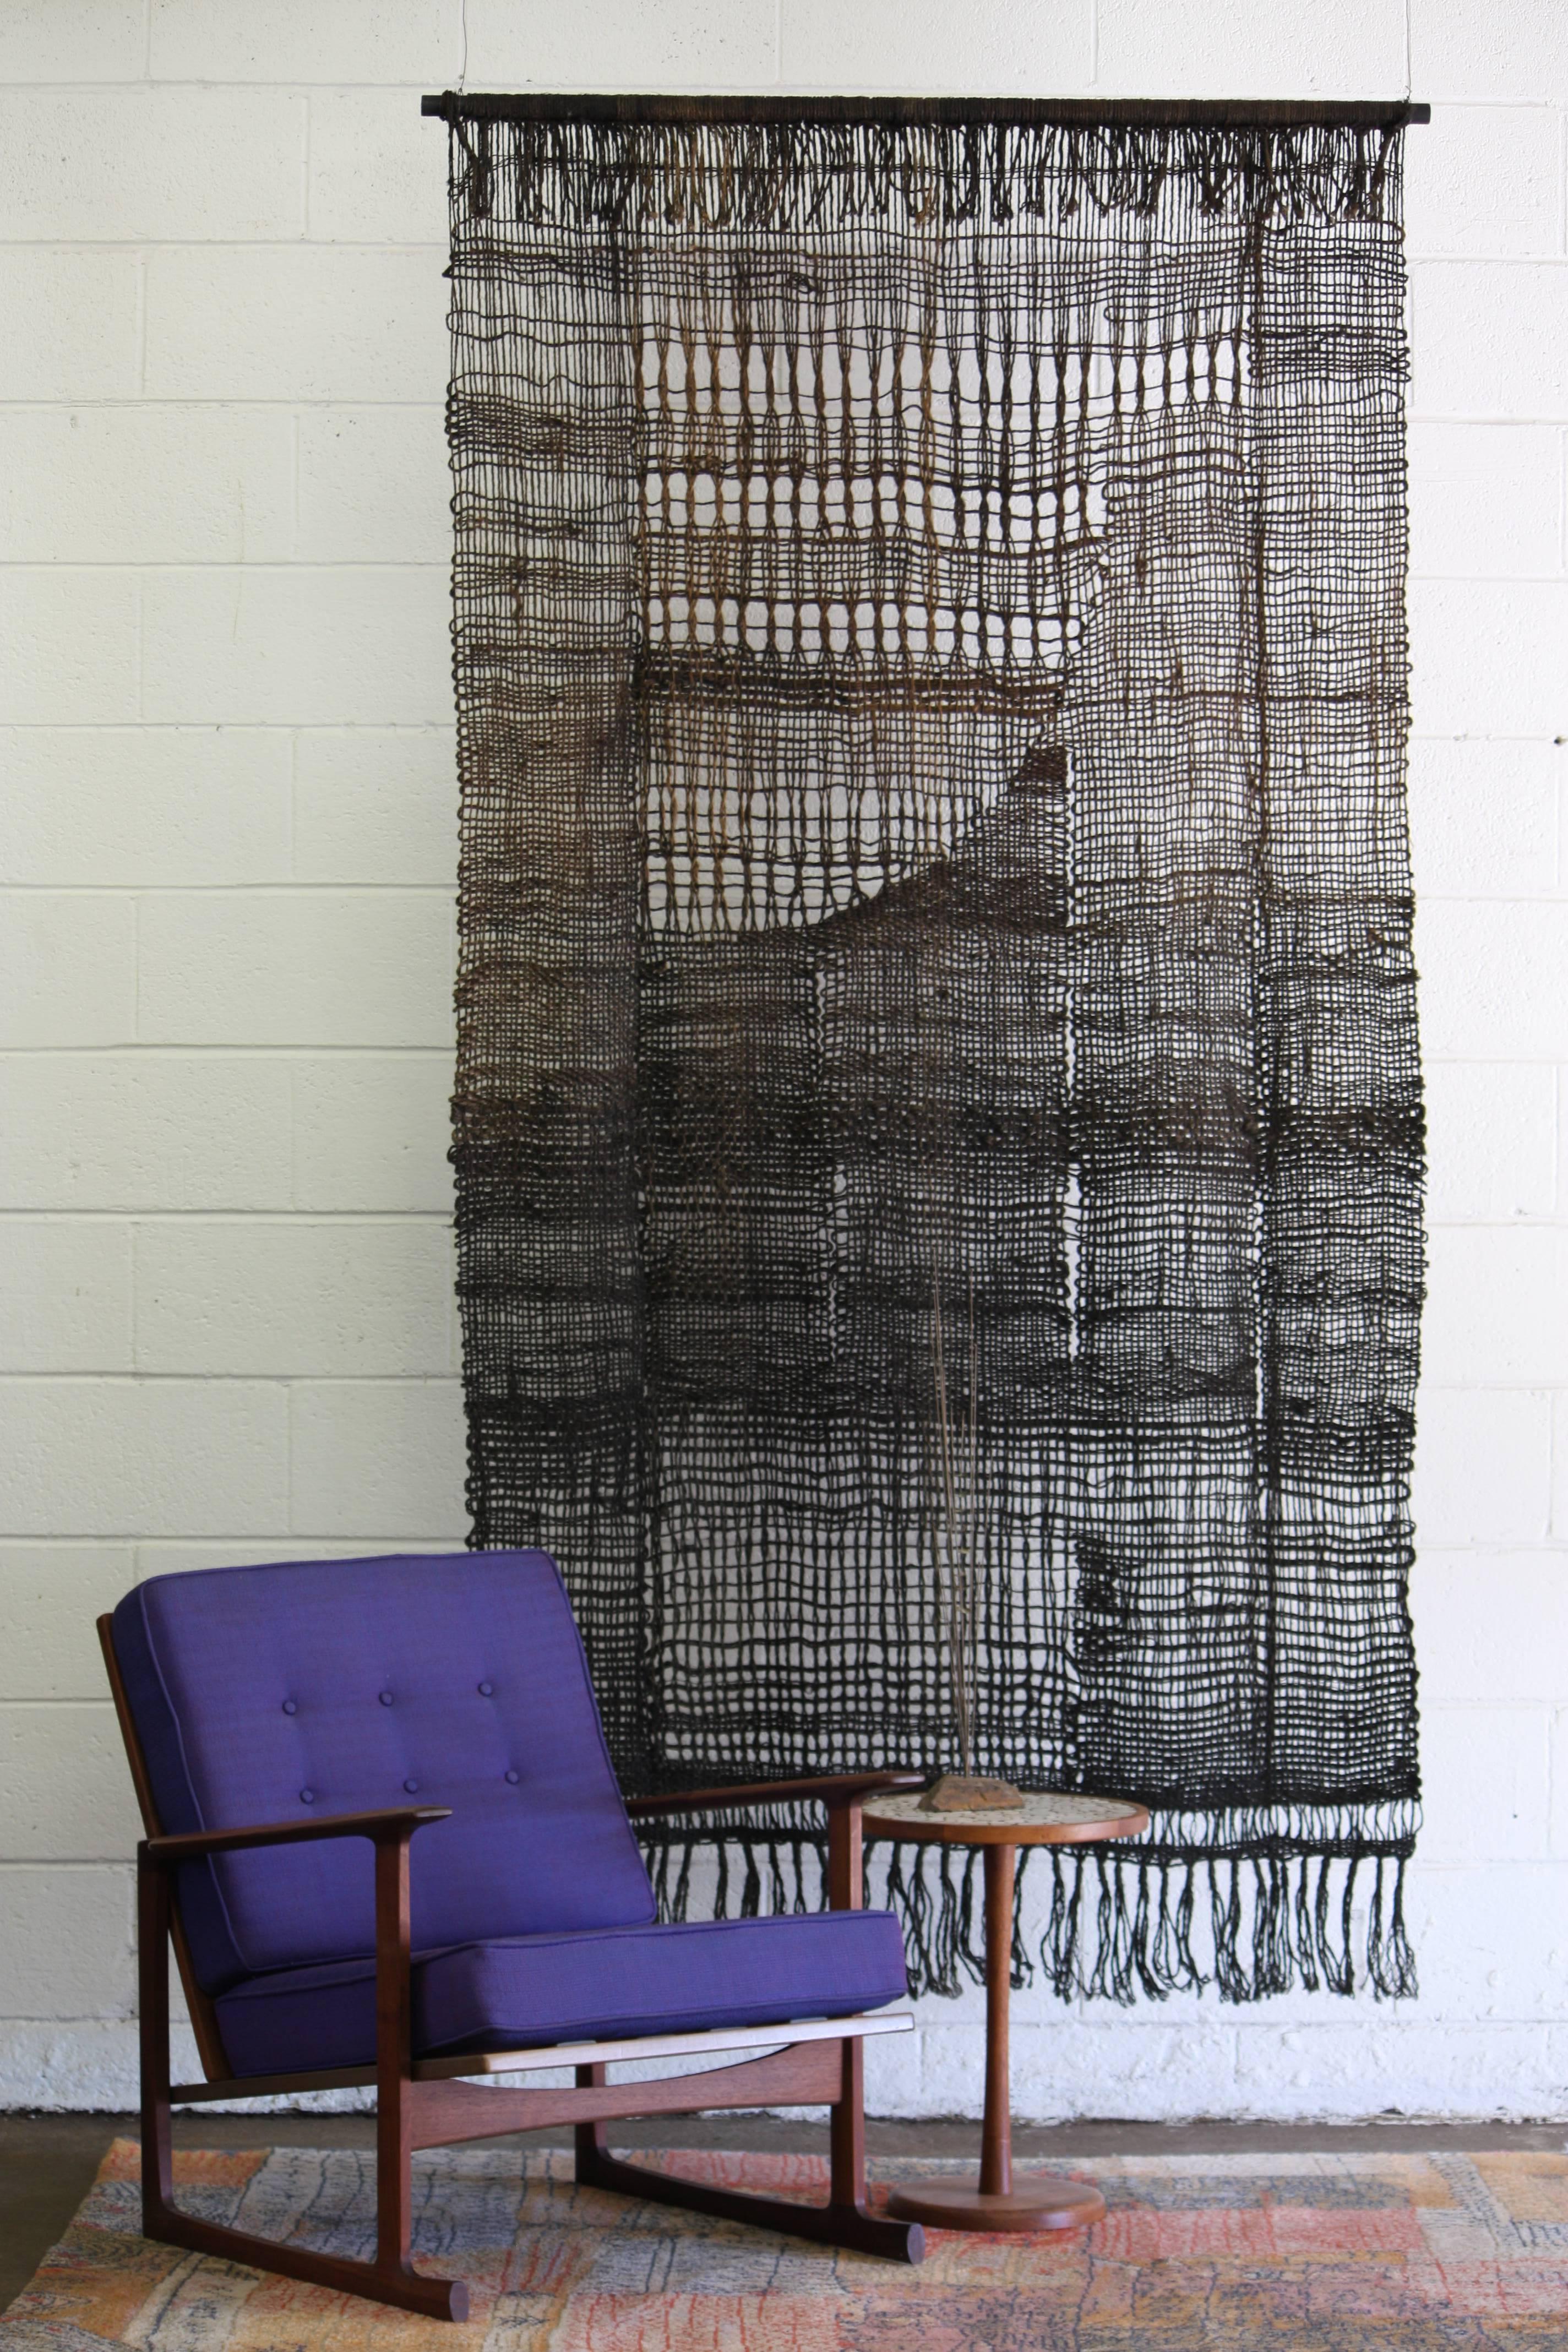 Amazing off loom wool weaving with geometric patterns and ever so slight ombré coloring. From the curated collection Space 20th Century Modern.